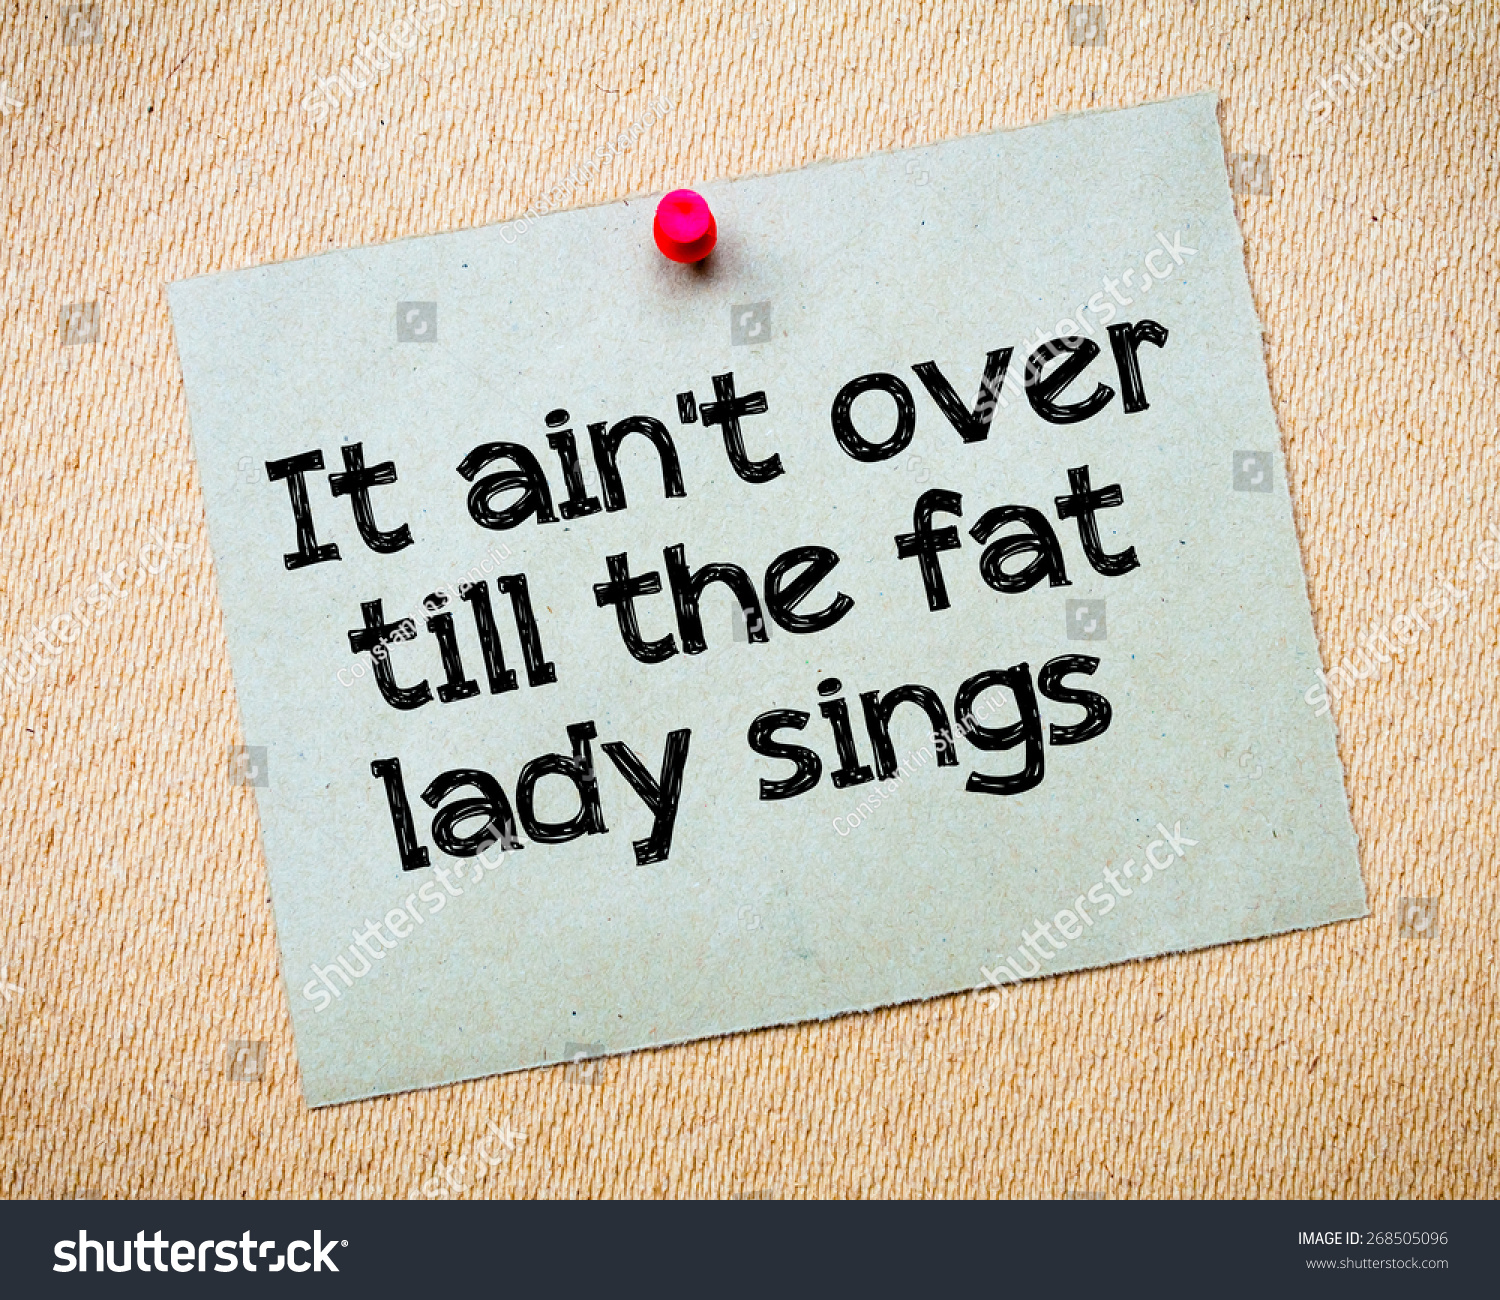 It ain't over till the fat lady sings gif